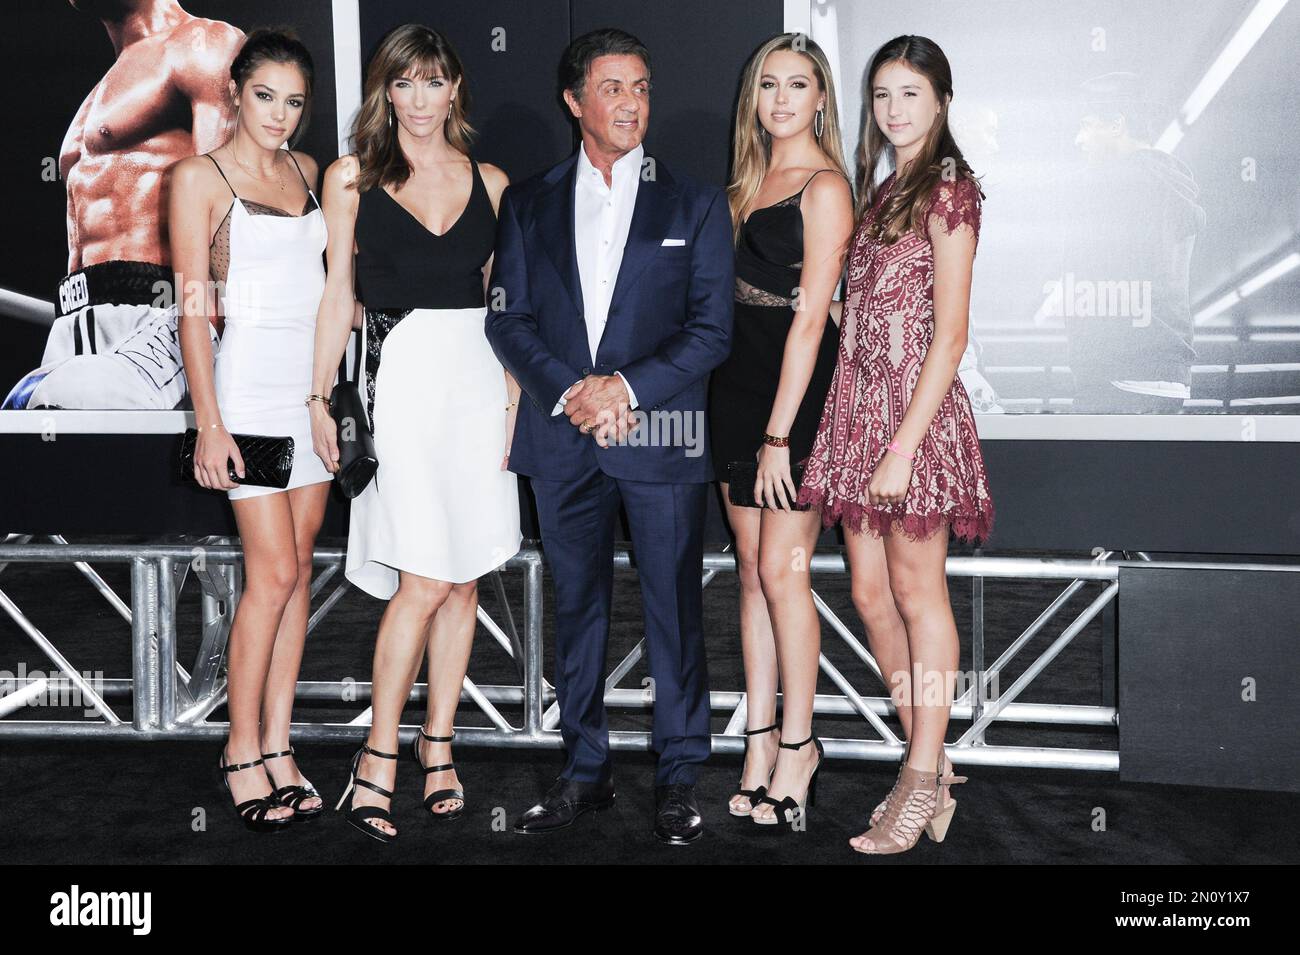 L-R) Scarlet Rose Stallone, Sistine Rose Stallone, and Sophia Rose Stallone  at the 47 METERS DOWN UNCAGED Premiere held at the Regency Village Theater  in Westwood, CA on Tuesday, August 13, 2019. (